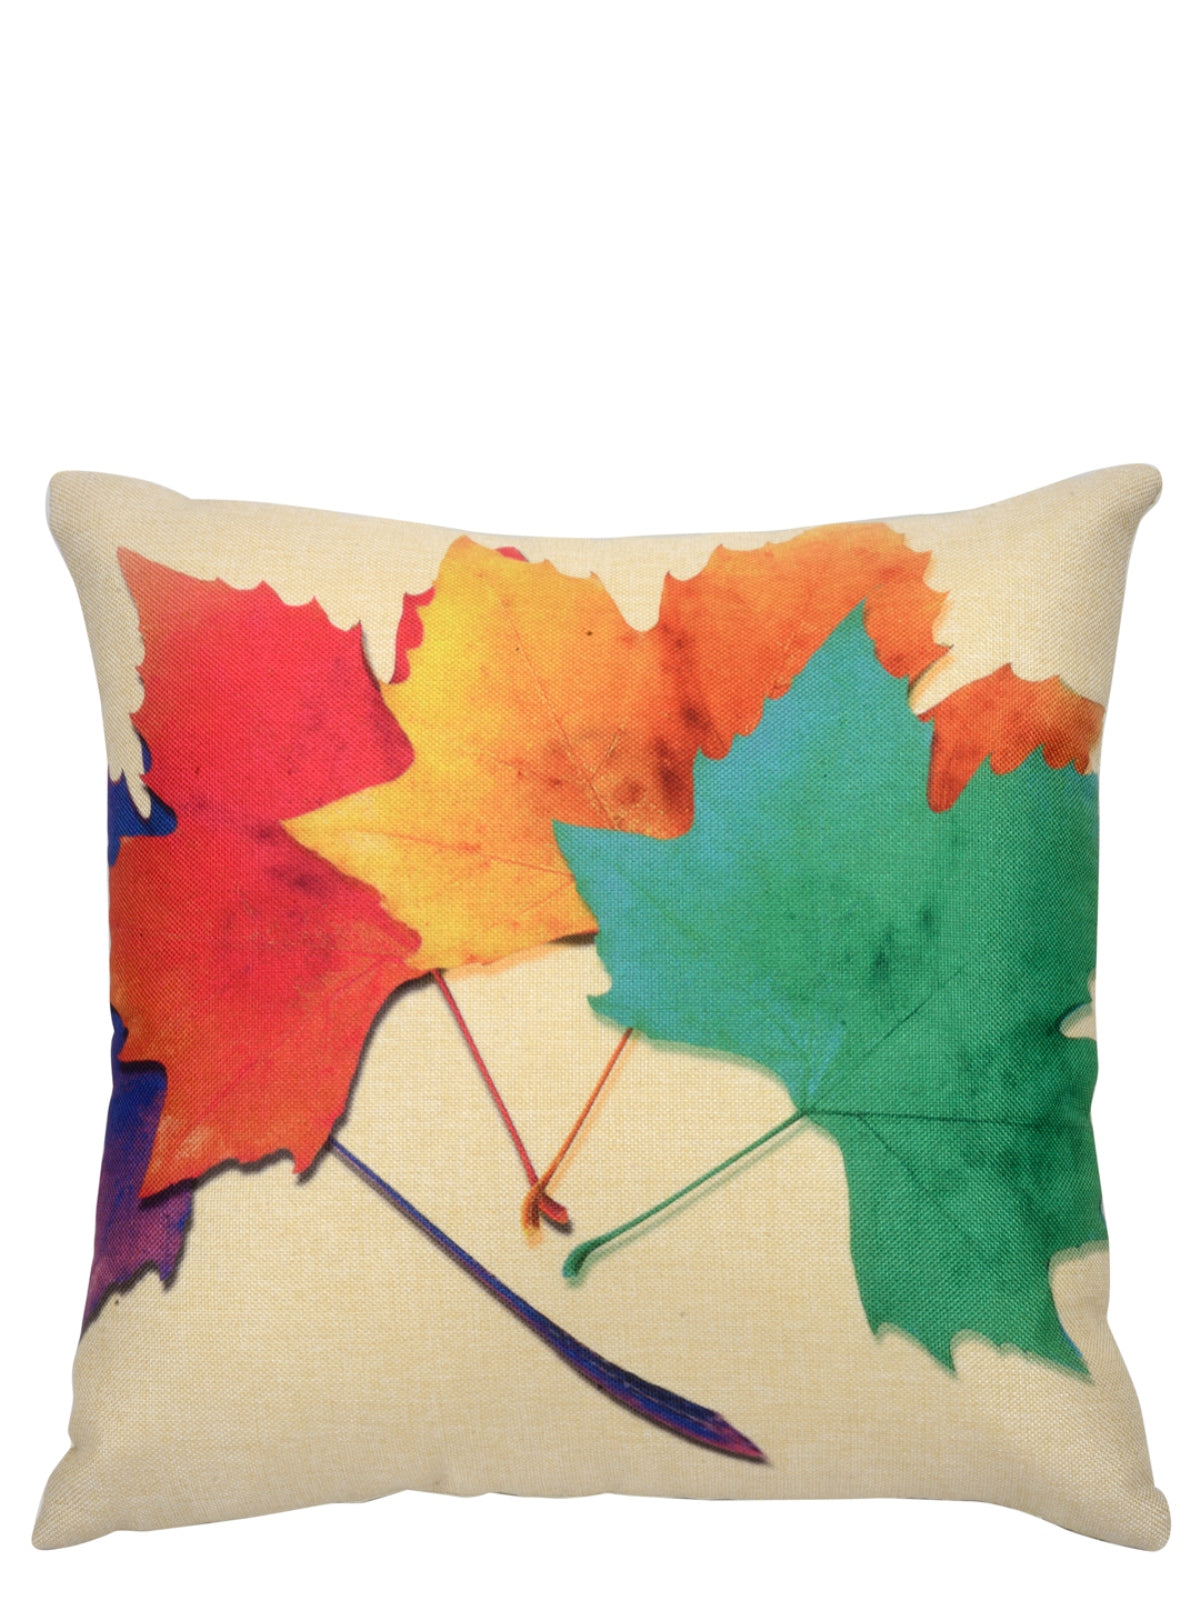 Soft Polyester Jute Leaves Print Cushion Covers 16 inch x 16 inch Set of 5 - Multicolor